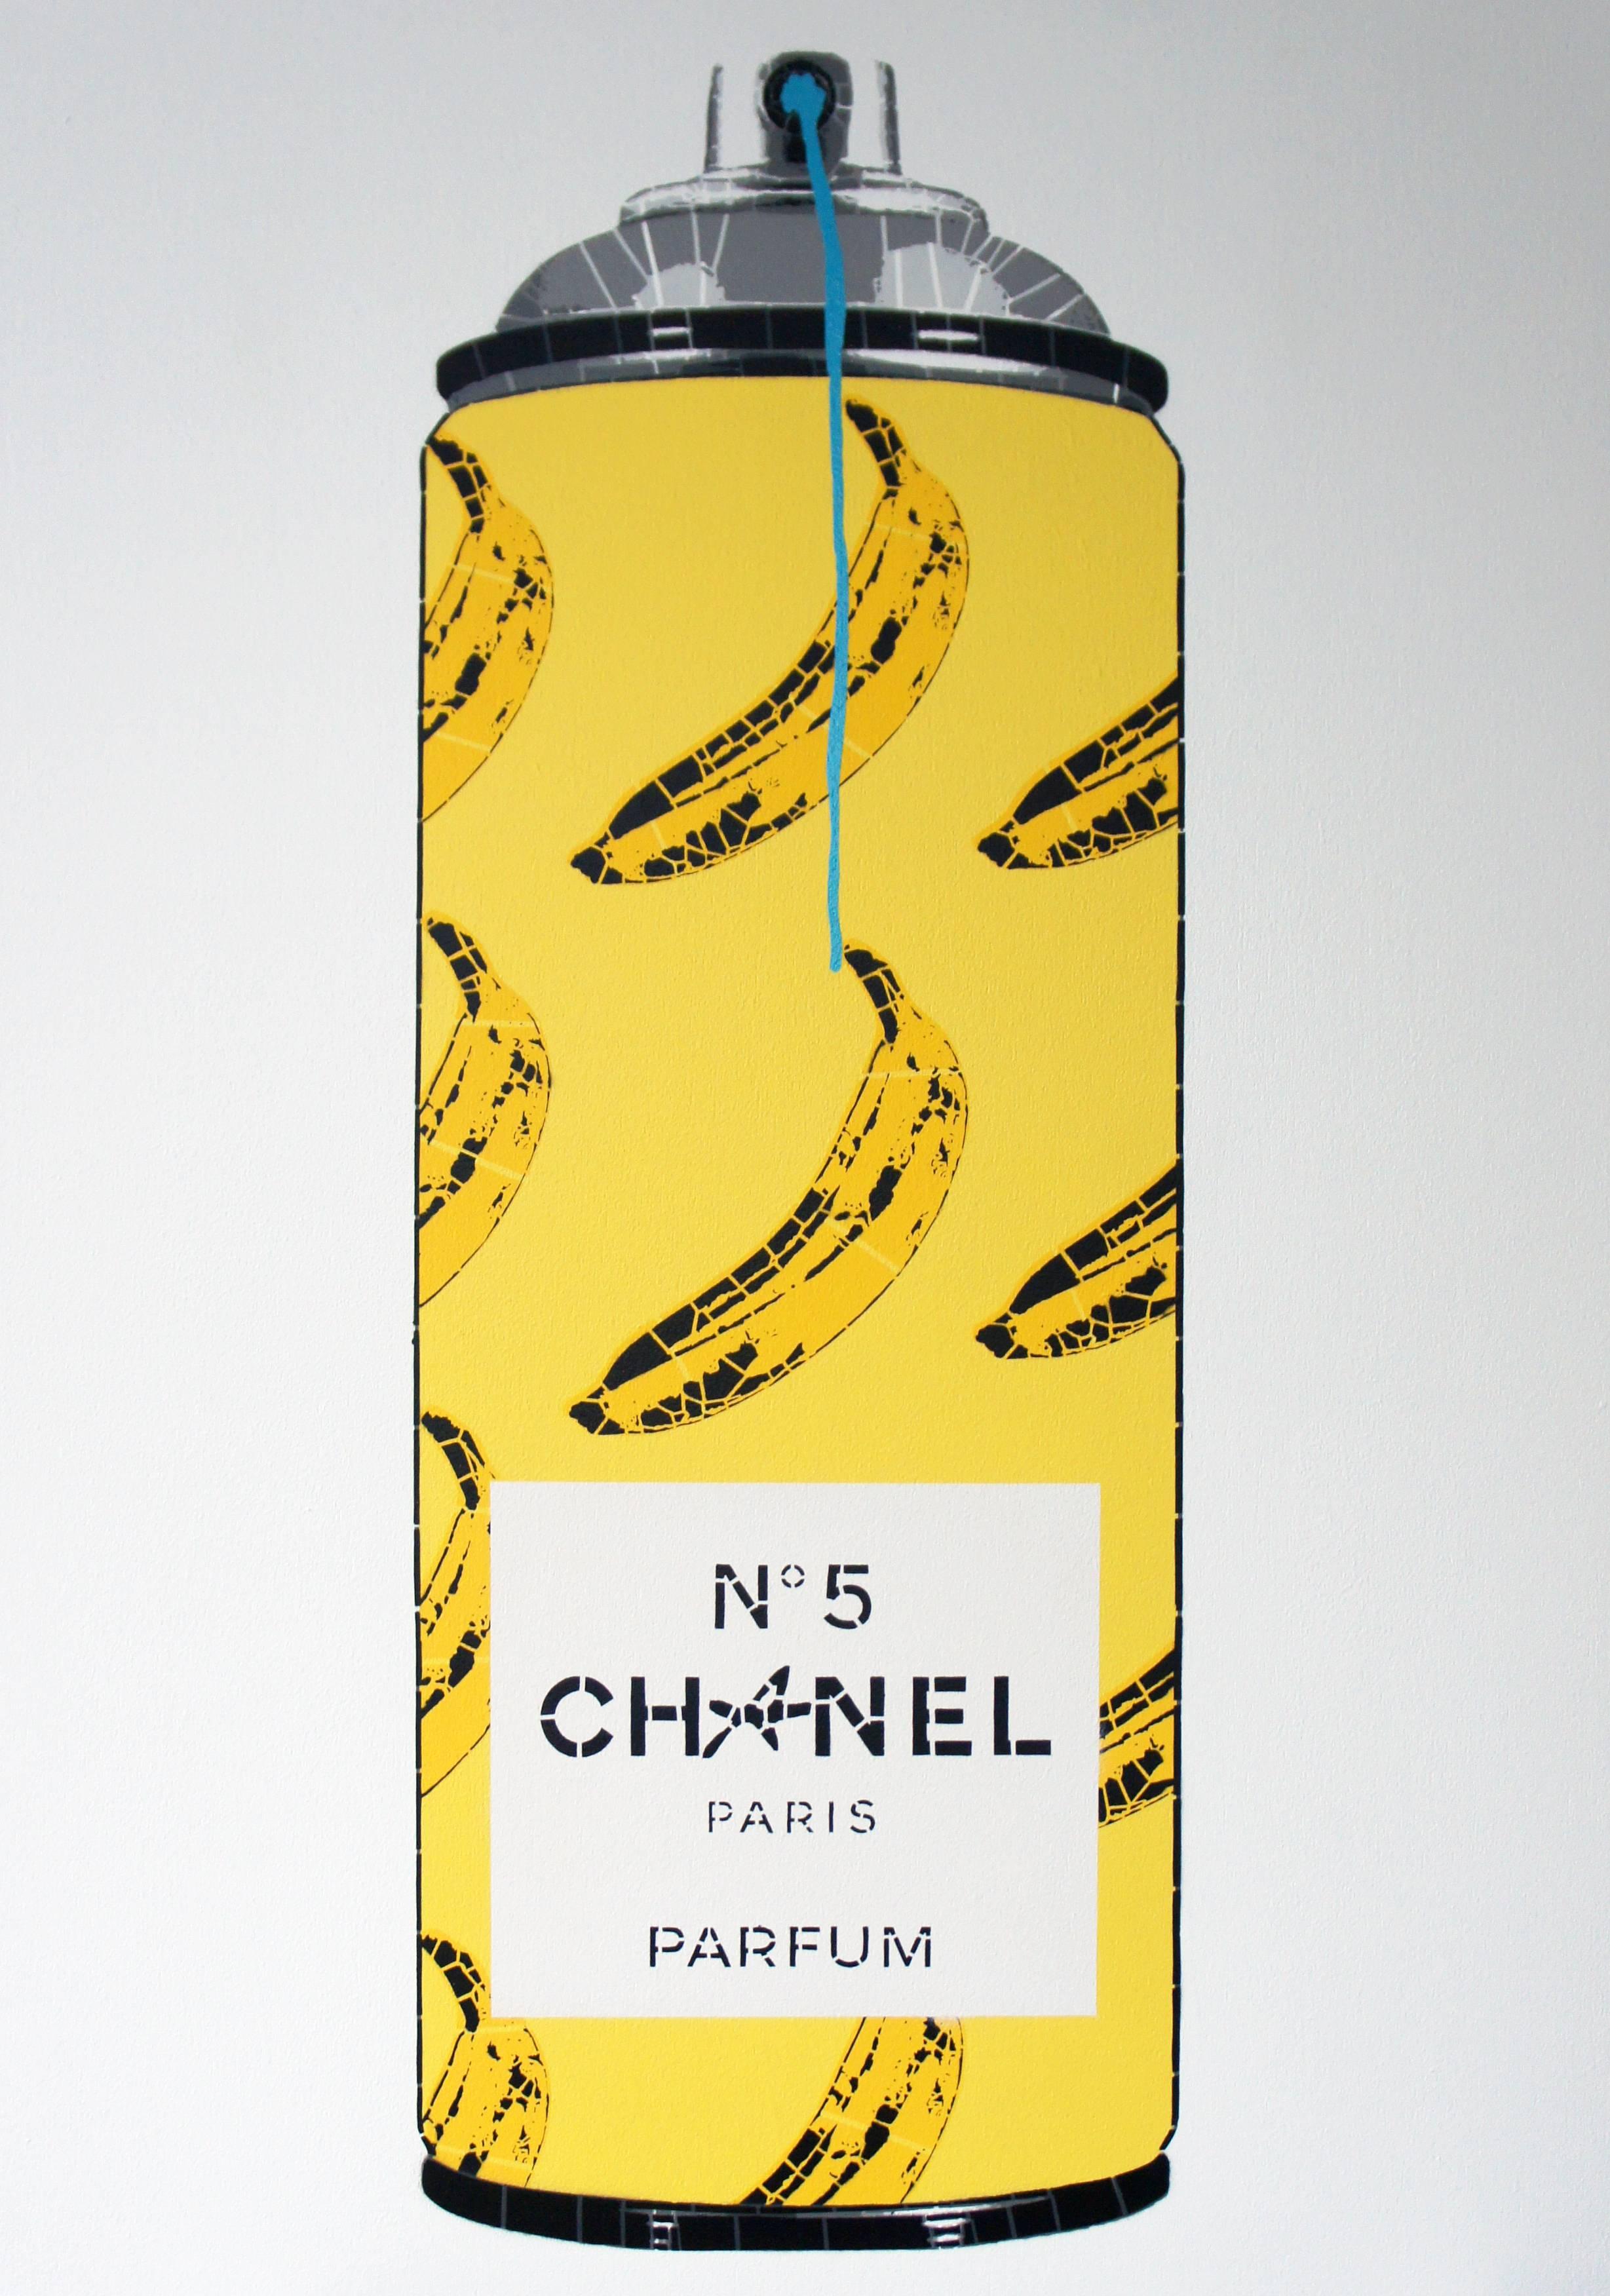 Chanel Bananas - Painting by Campbell la Pun